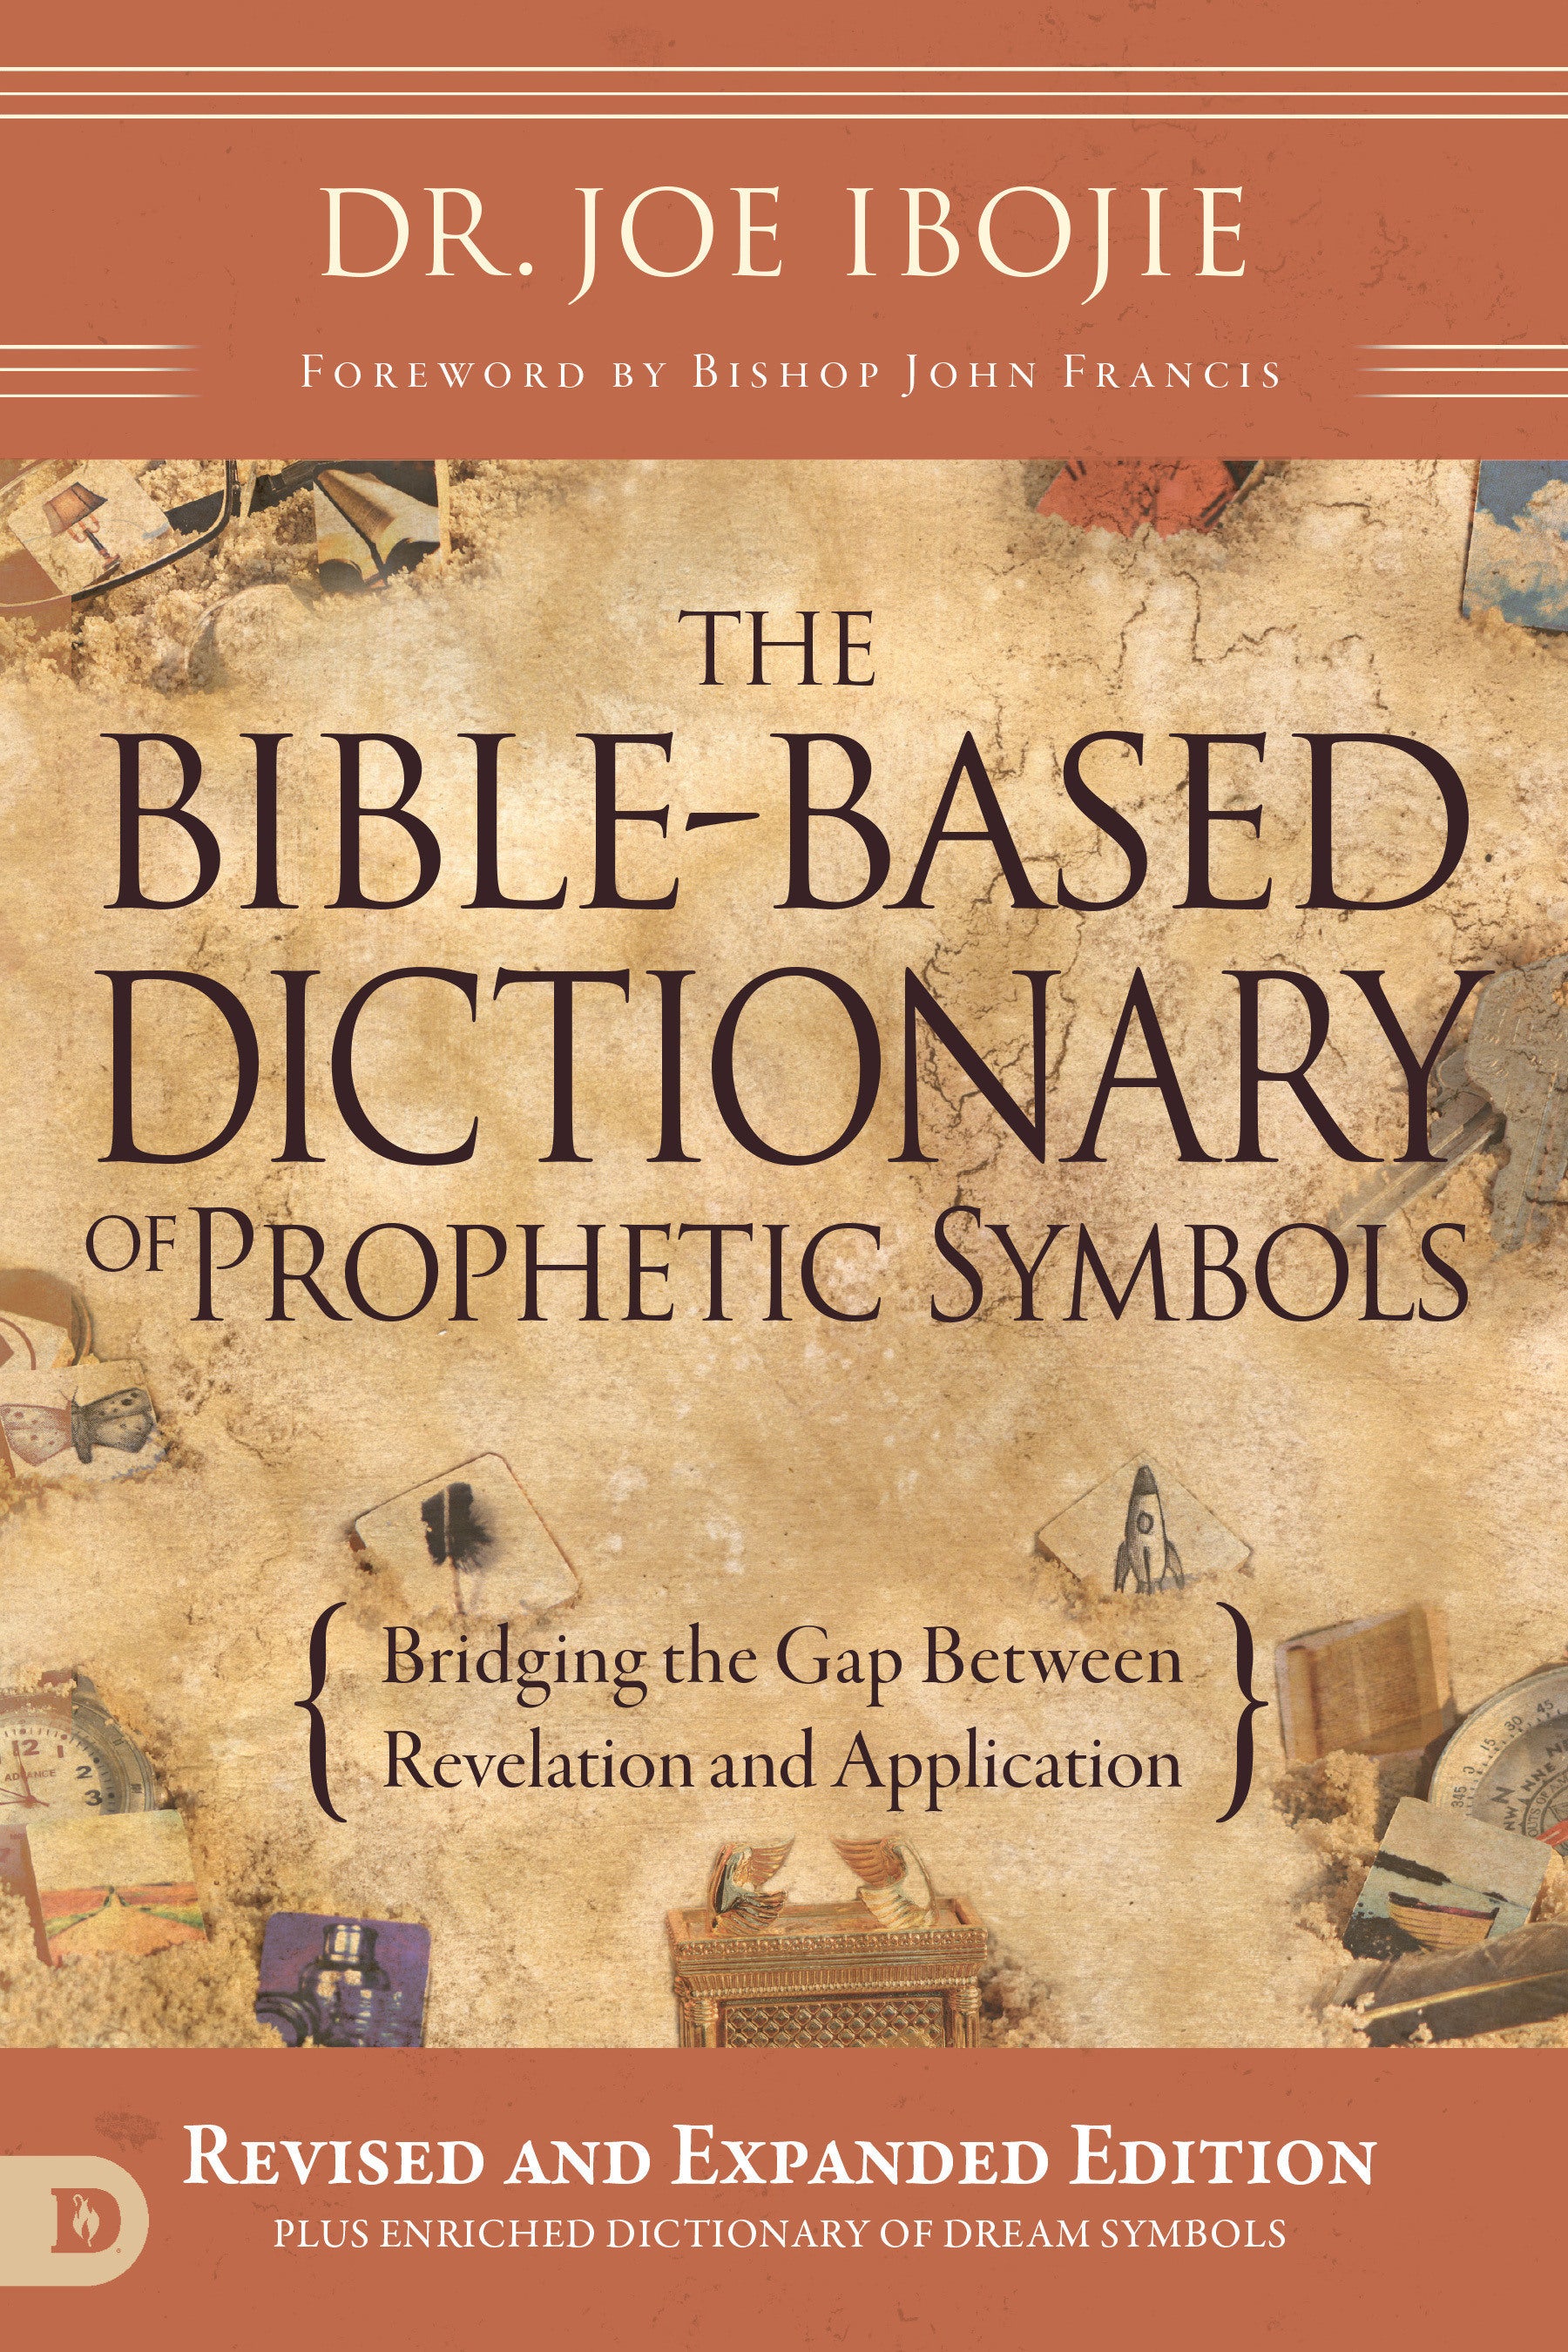 Image of The Bible-Based Dictionary of Prophetic Symbols other